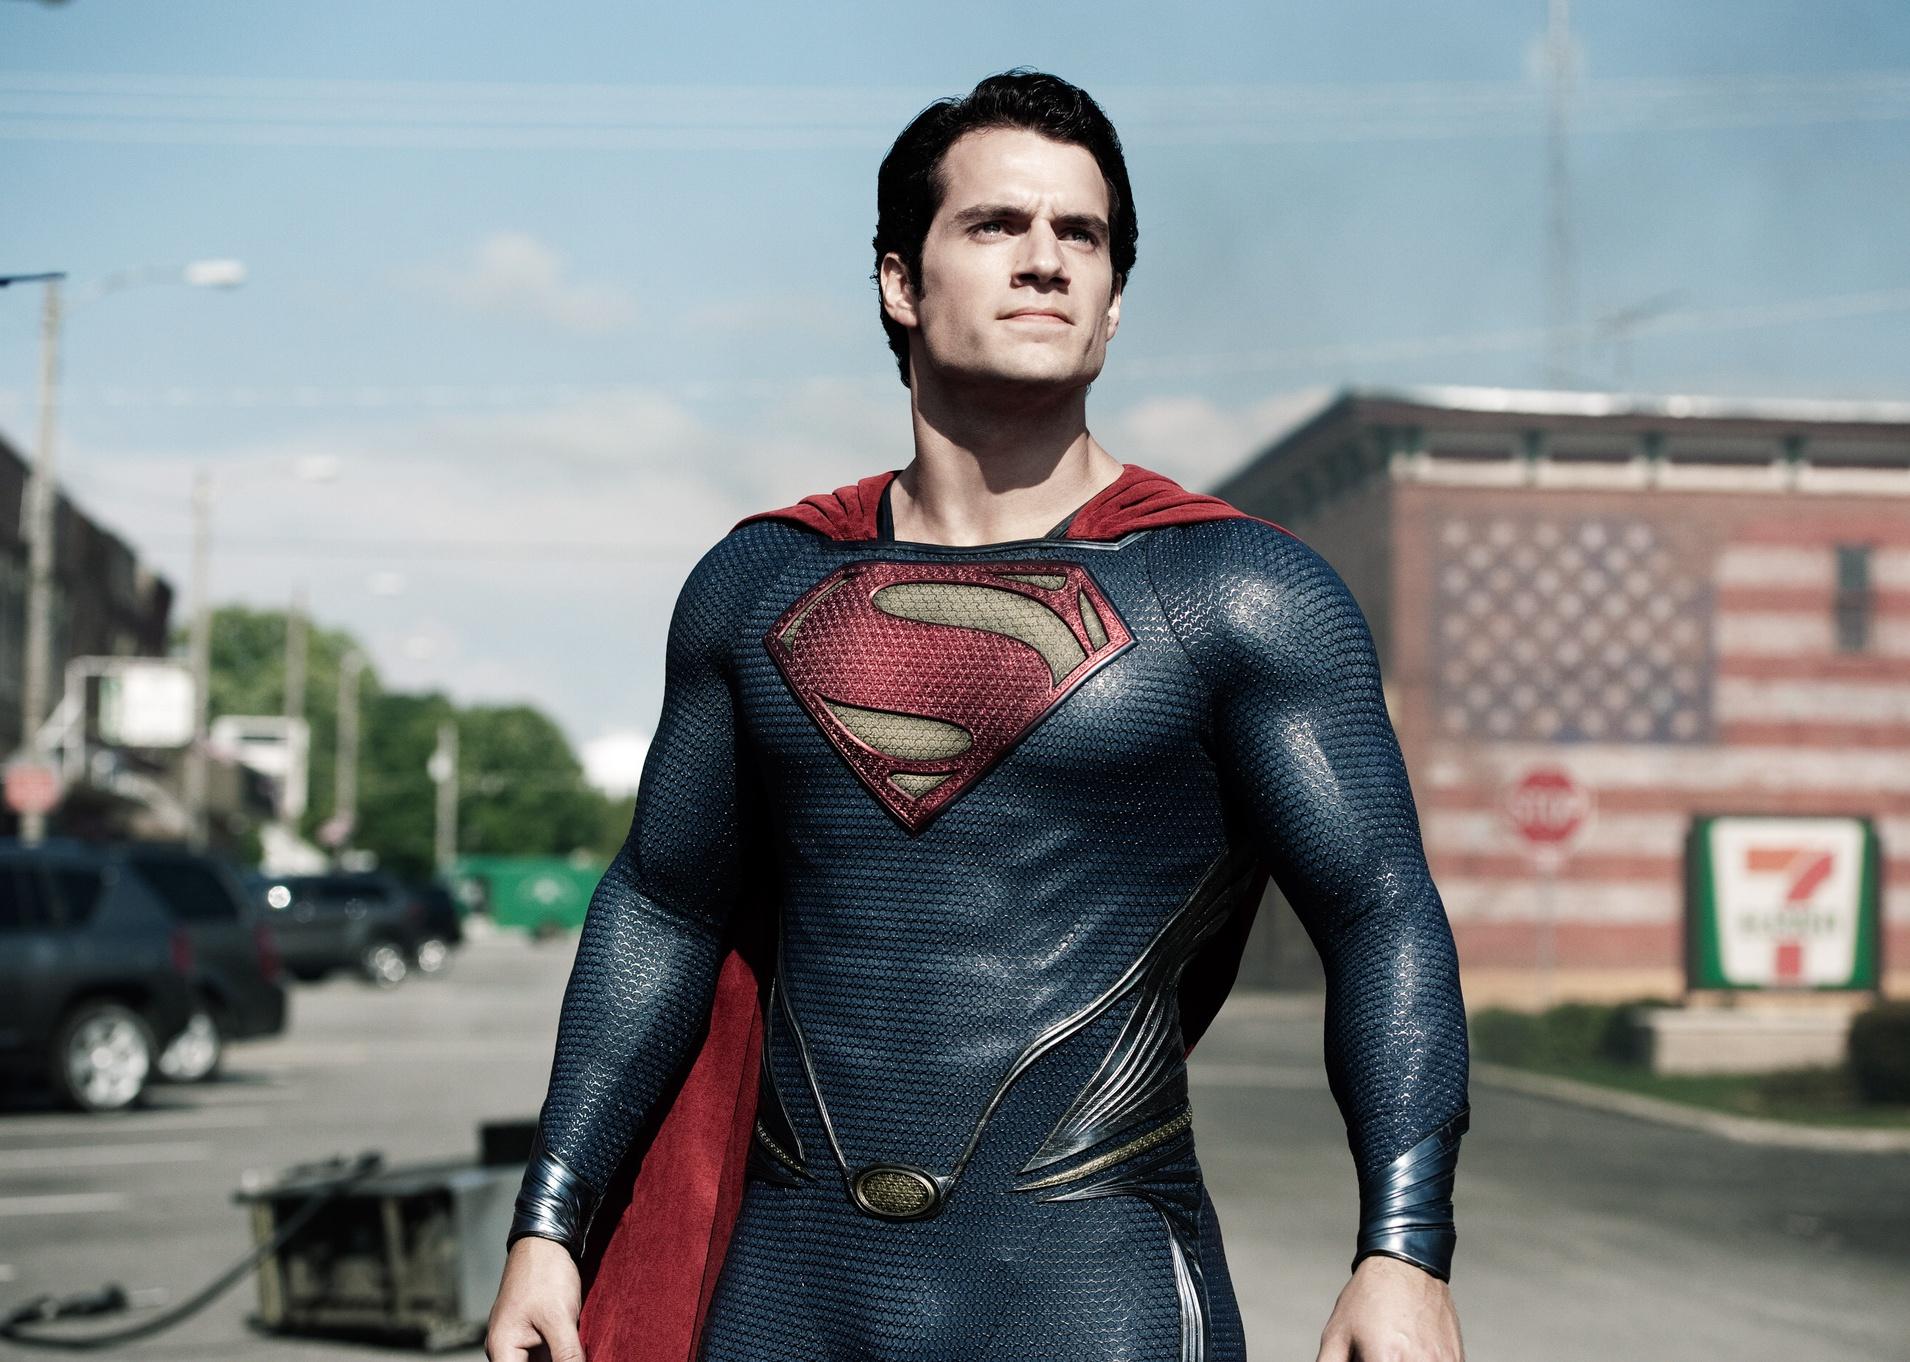 Superman standing in the middle of the street.